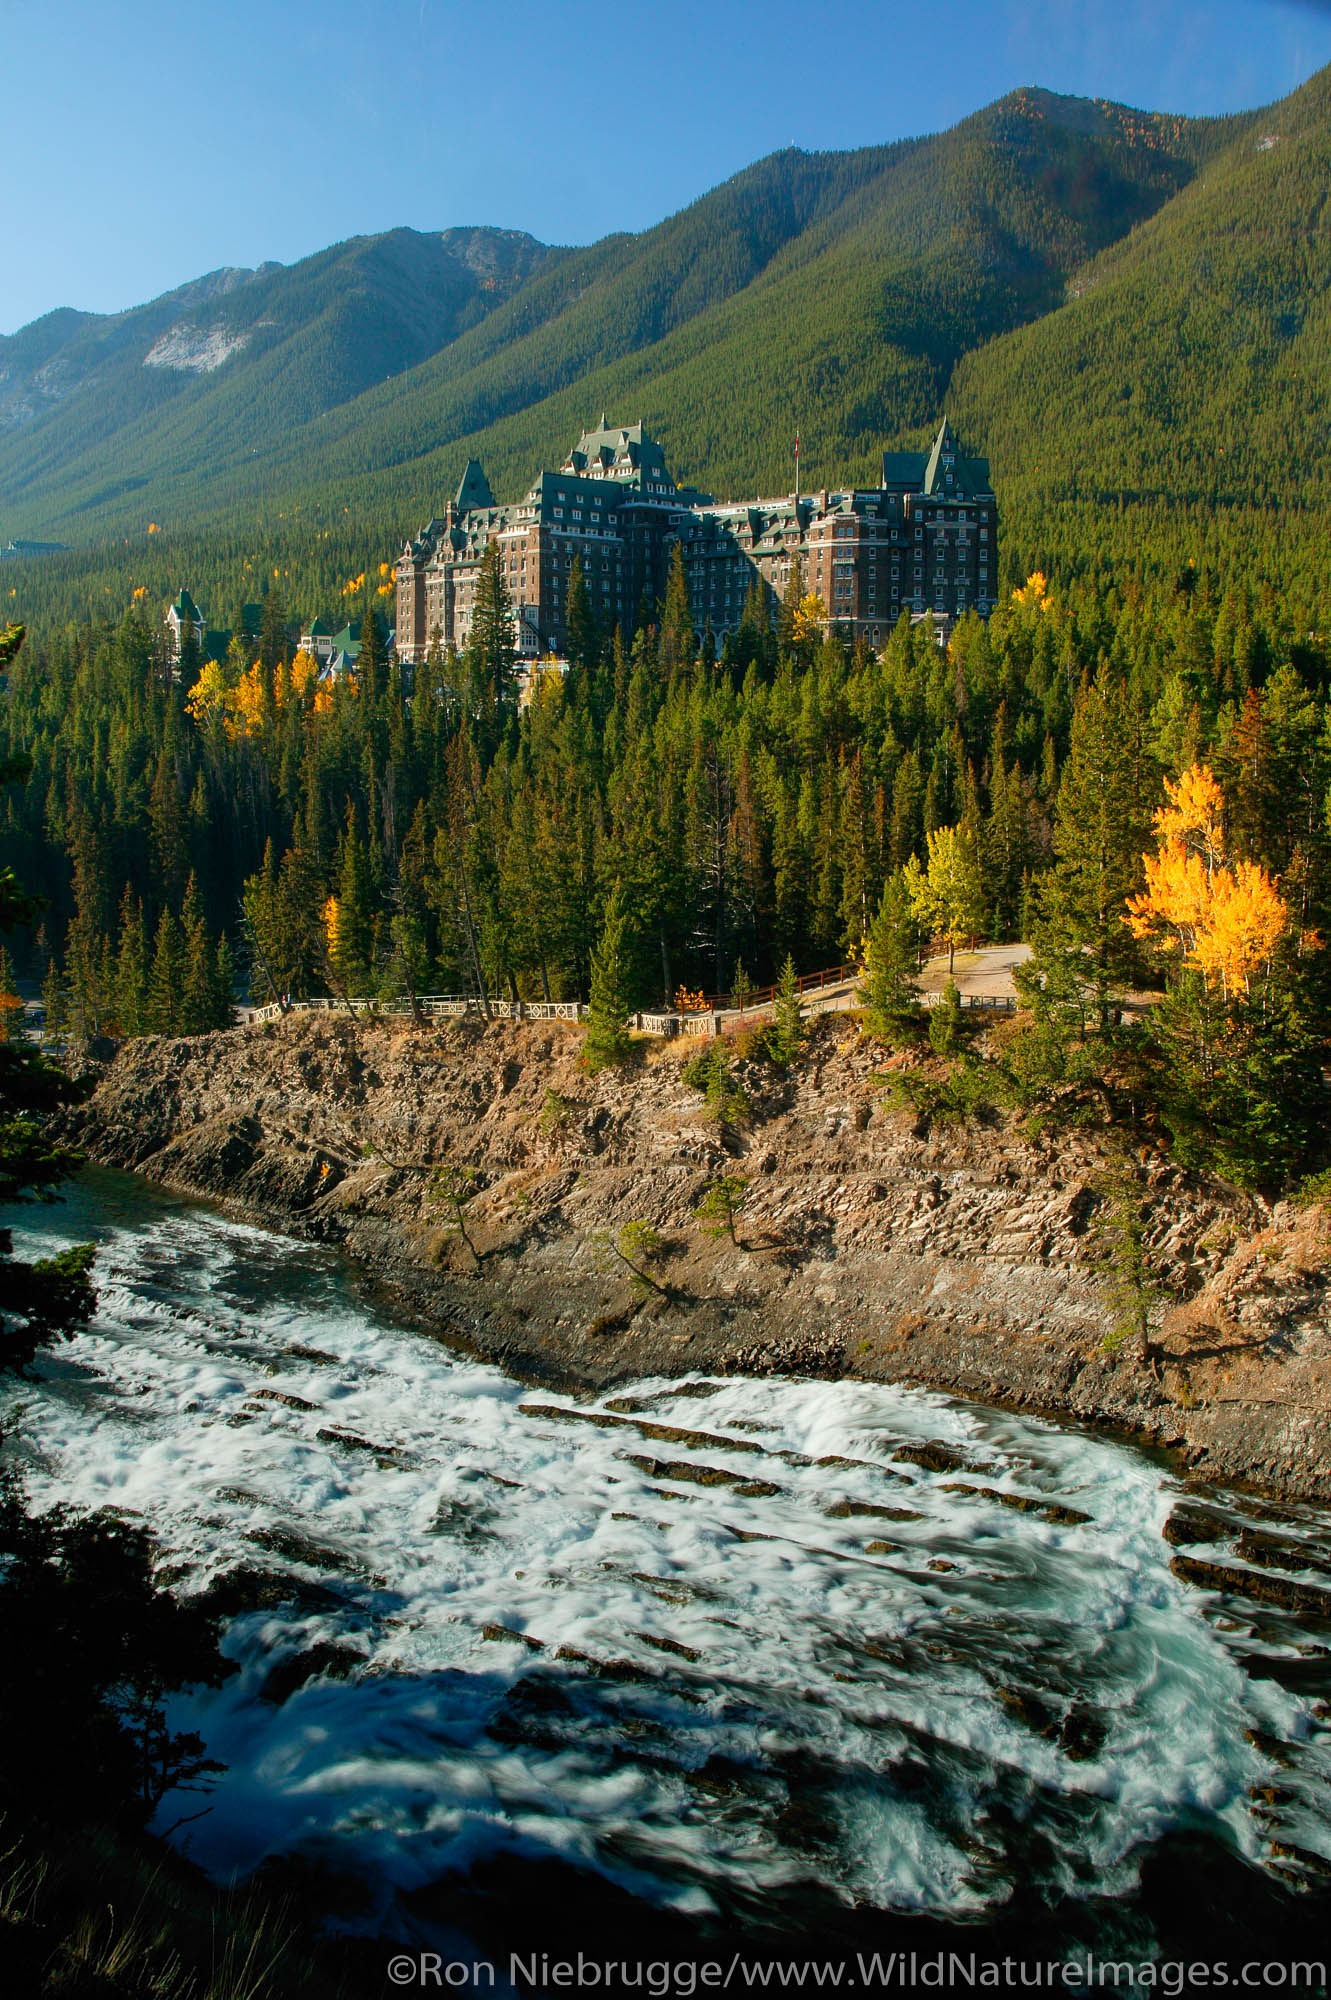 Banff Springs Hotel and the Bow River at the Bow Falls, Banff, Banff National Park, Alberta, Canada.